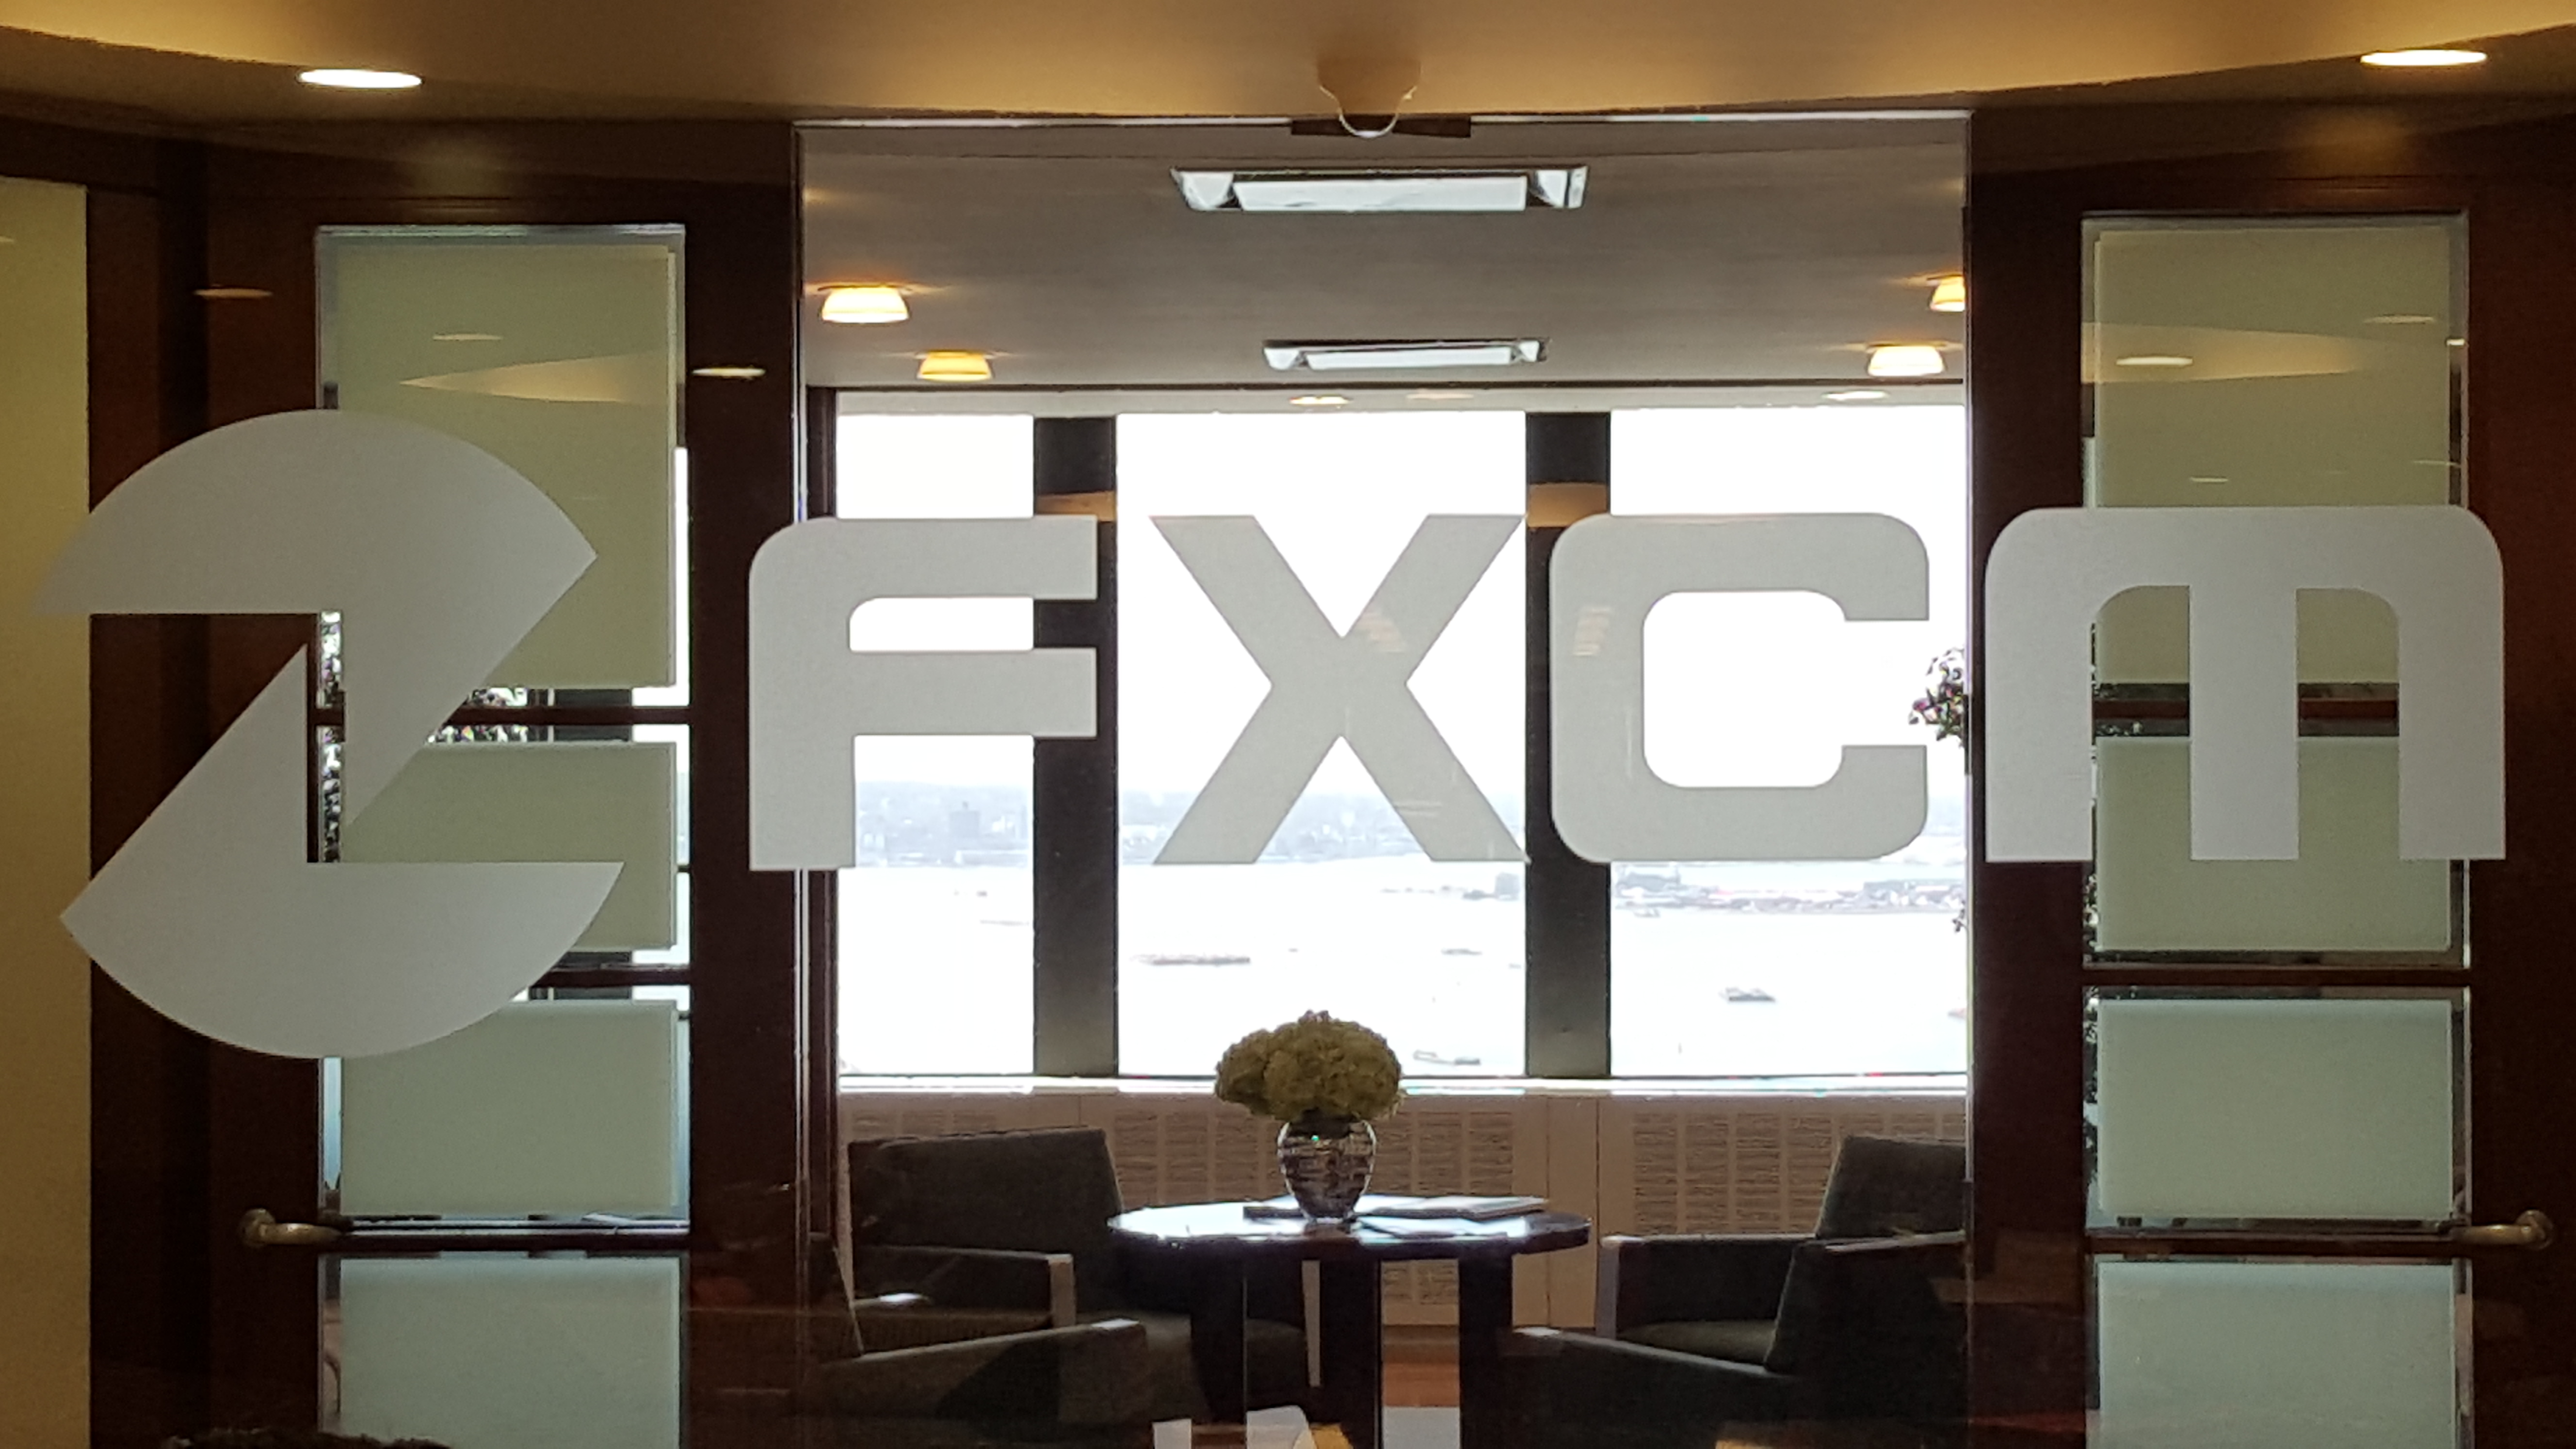 FXCM Officially Launches its New HTML5 Platform, Trading Station Web 2.0